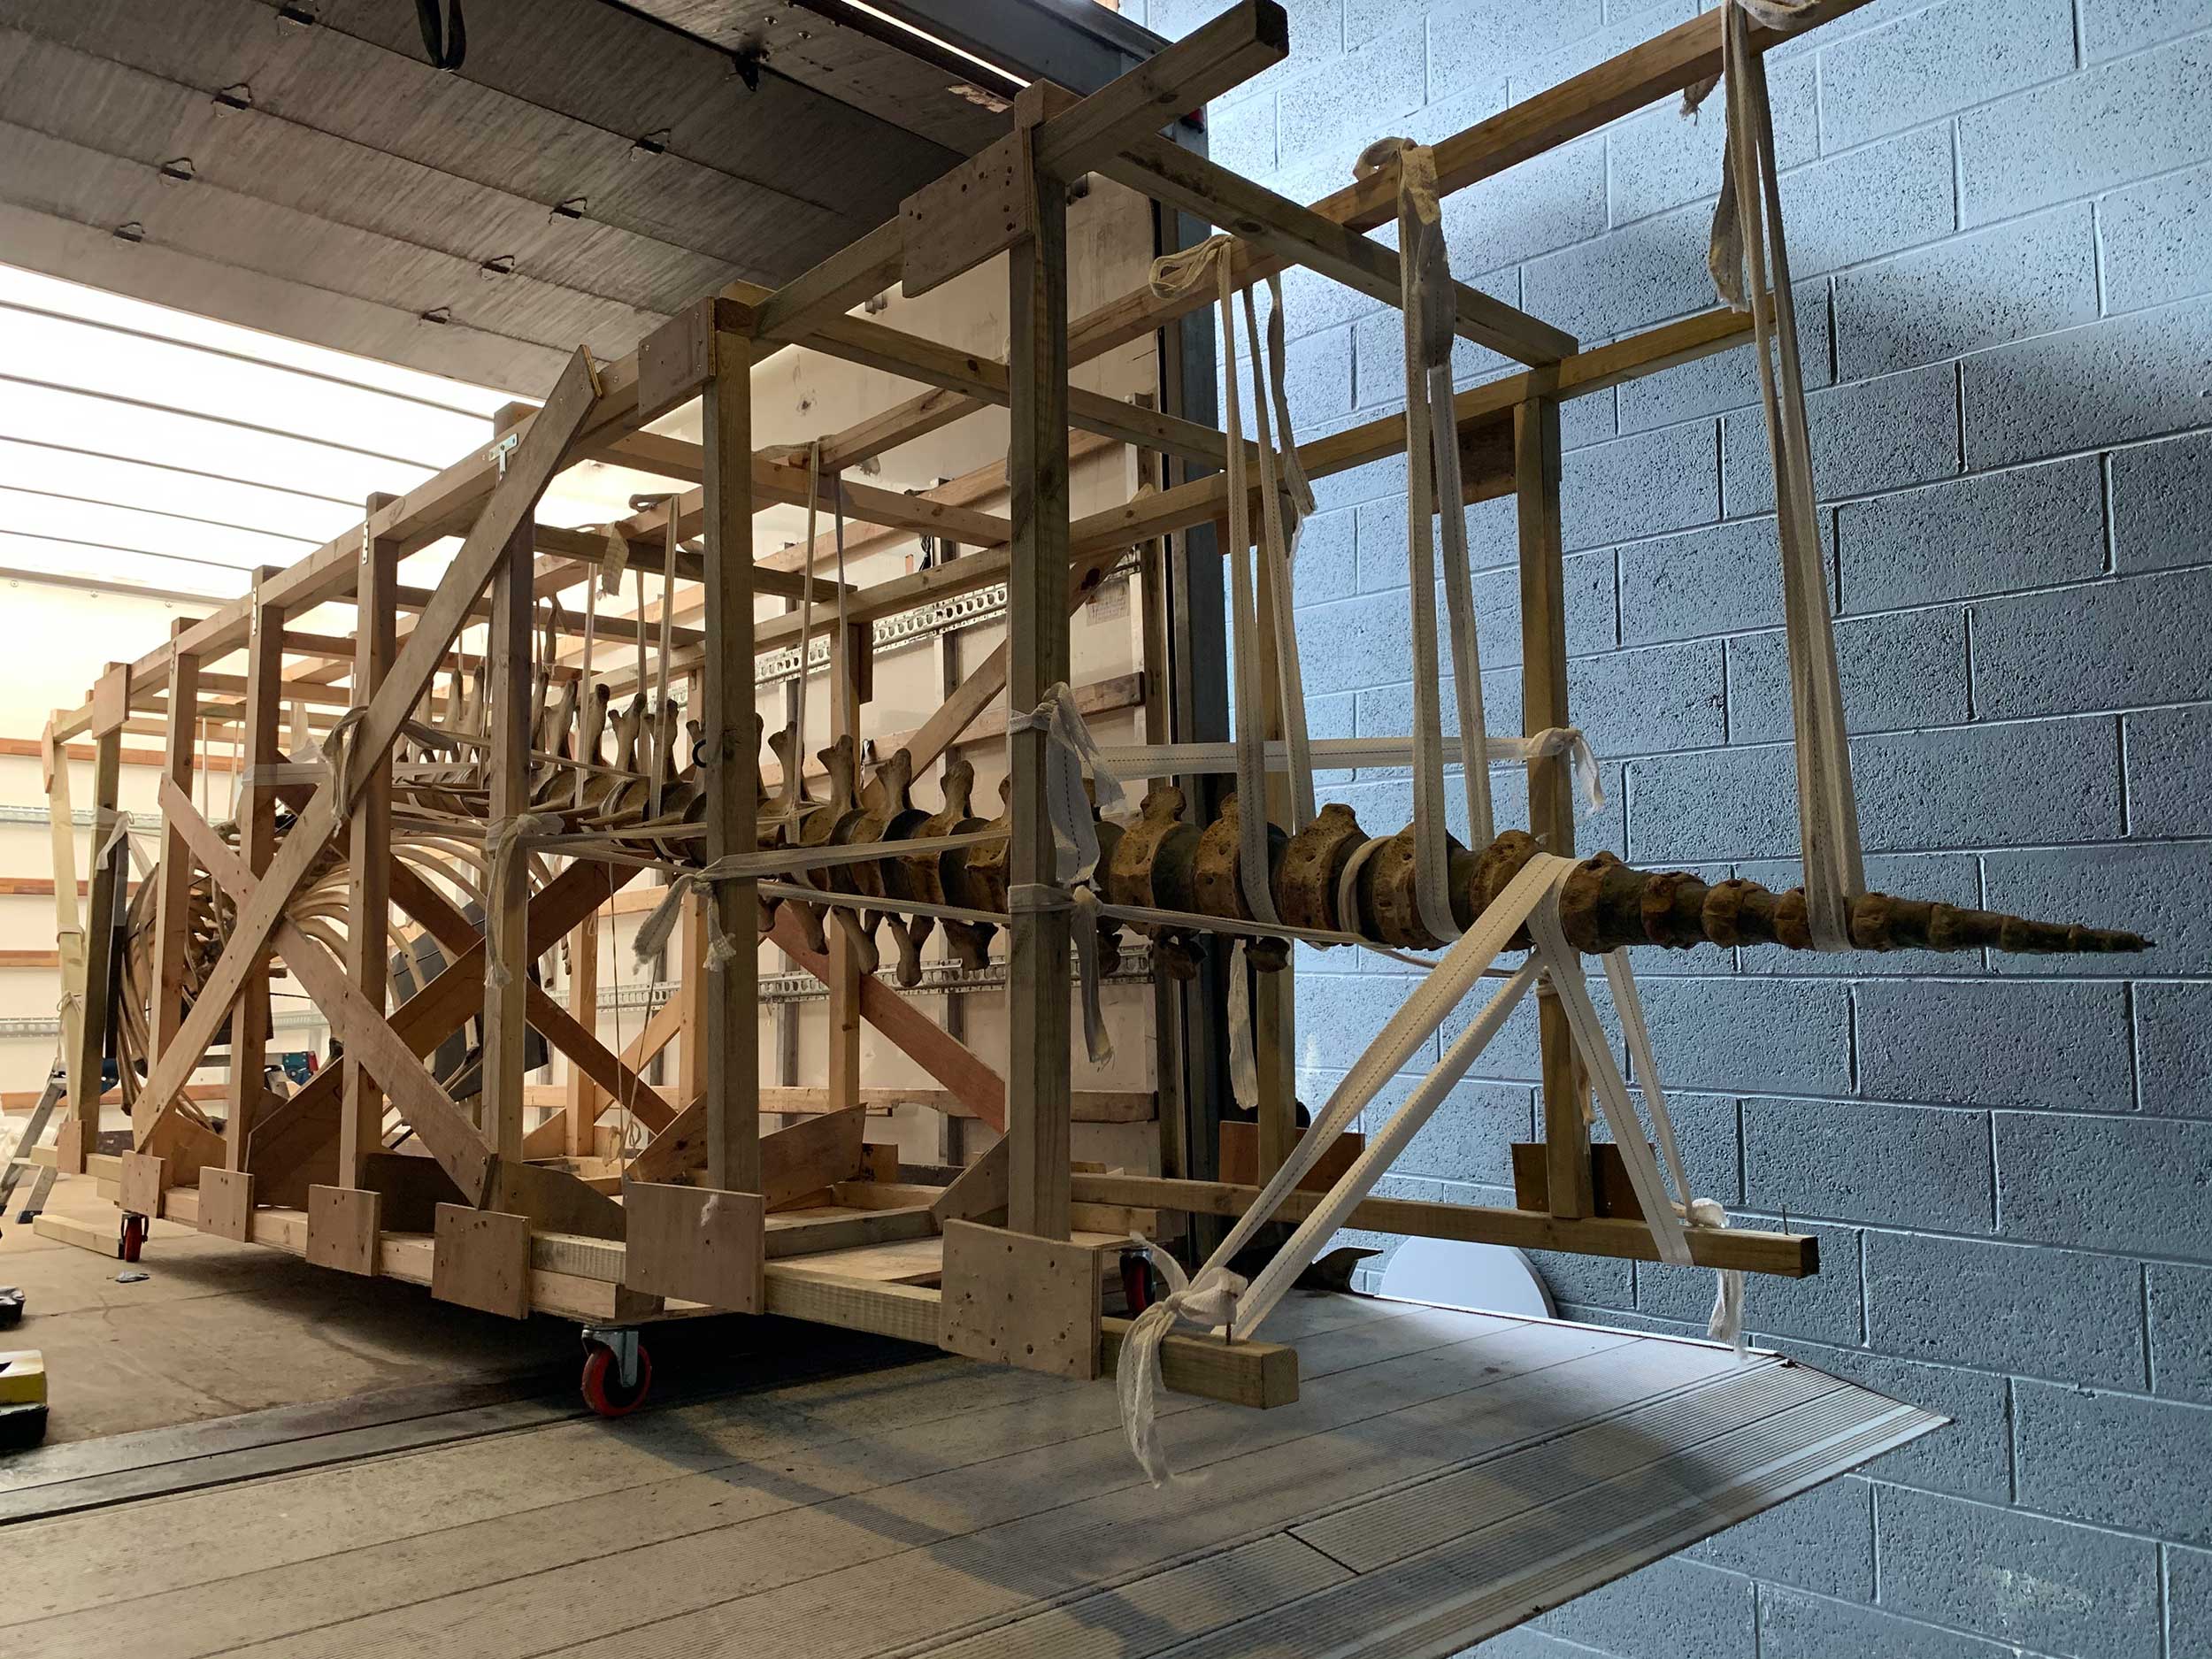 The killer whale skeleton arrives in a crate to the Museum.